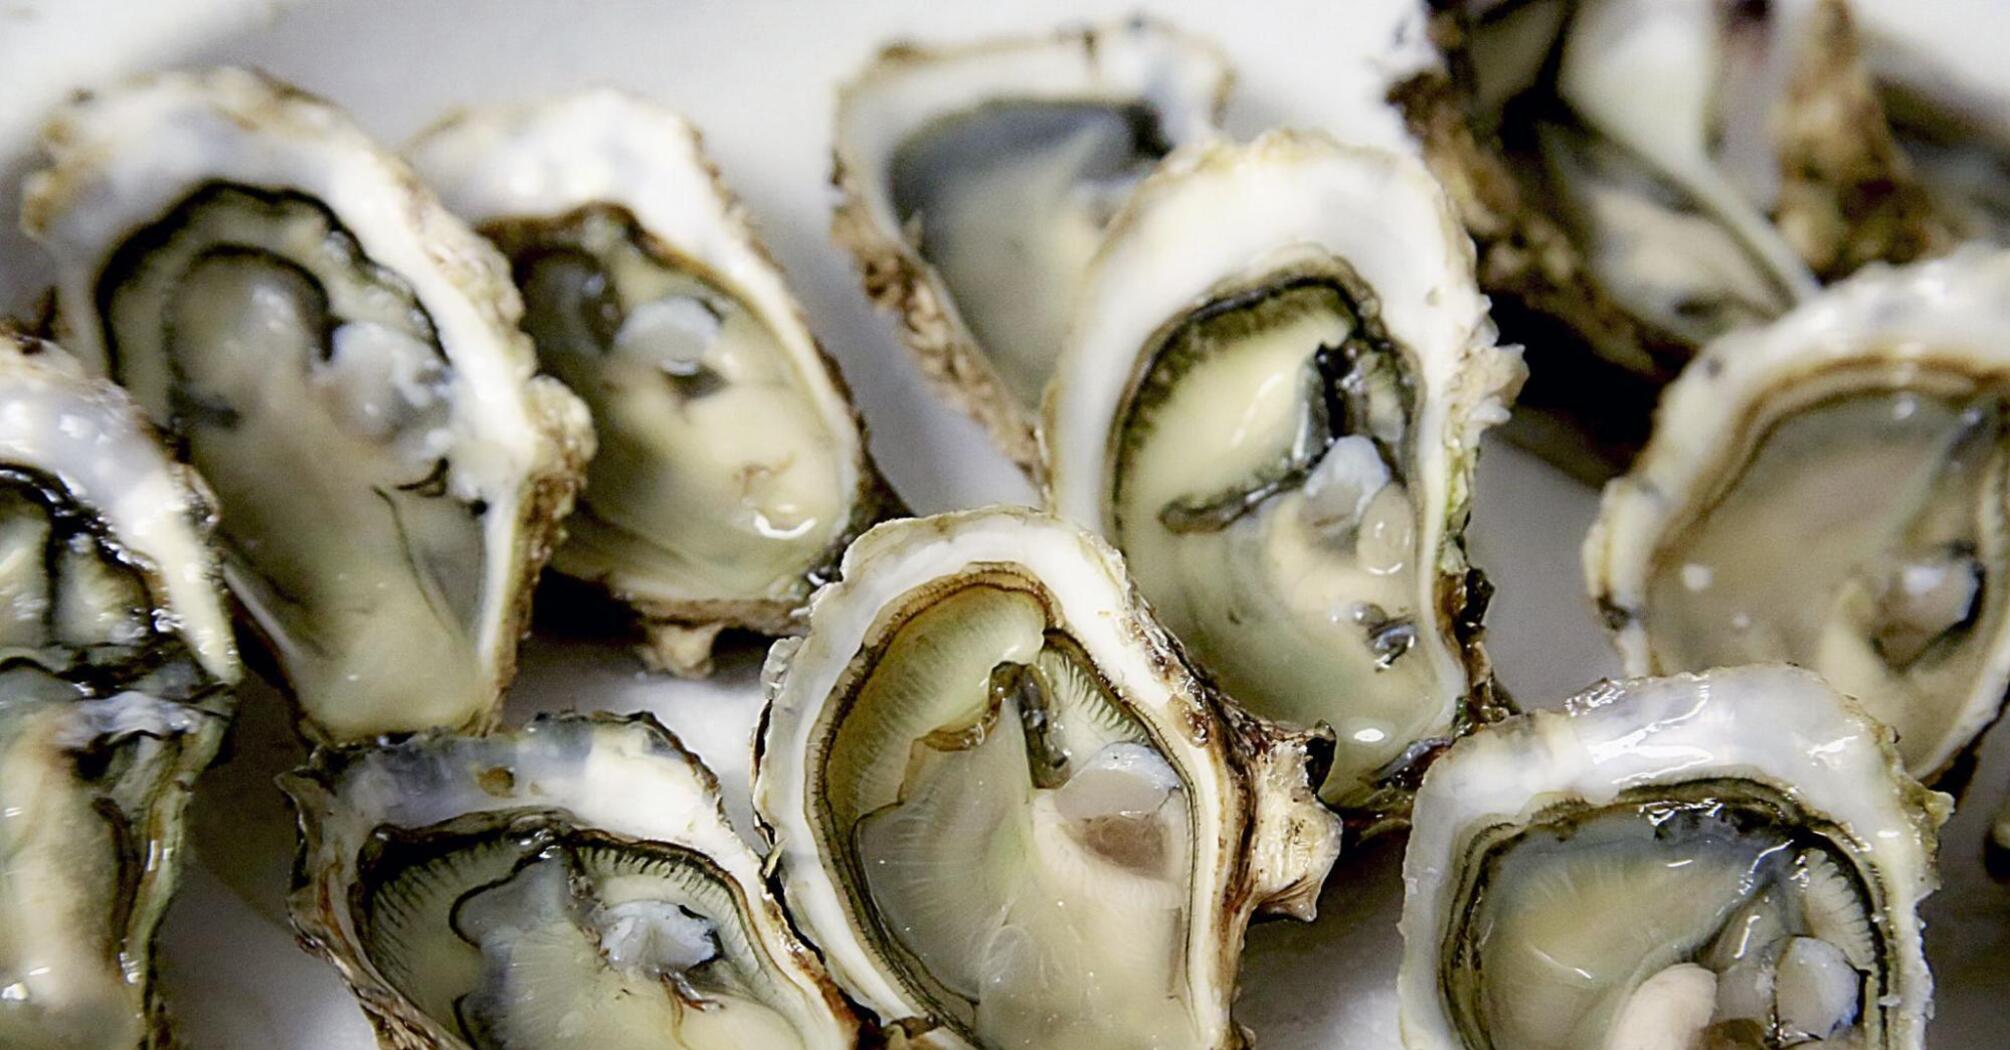 Beautiful presentation of freshly caught oysters